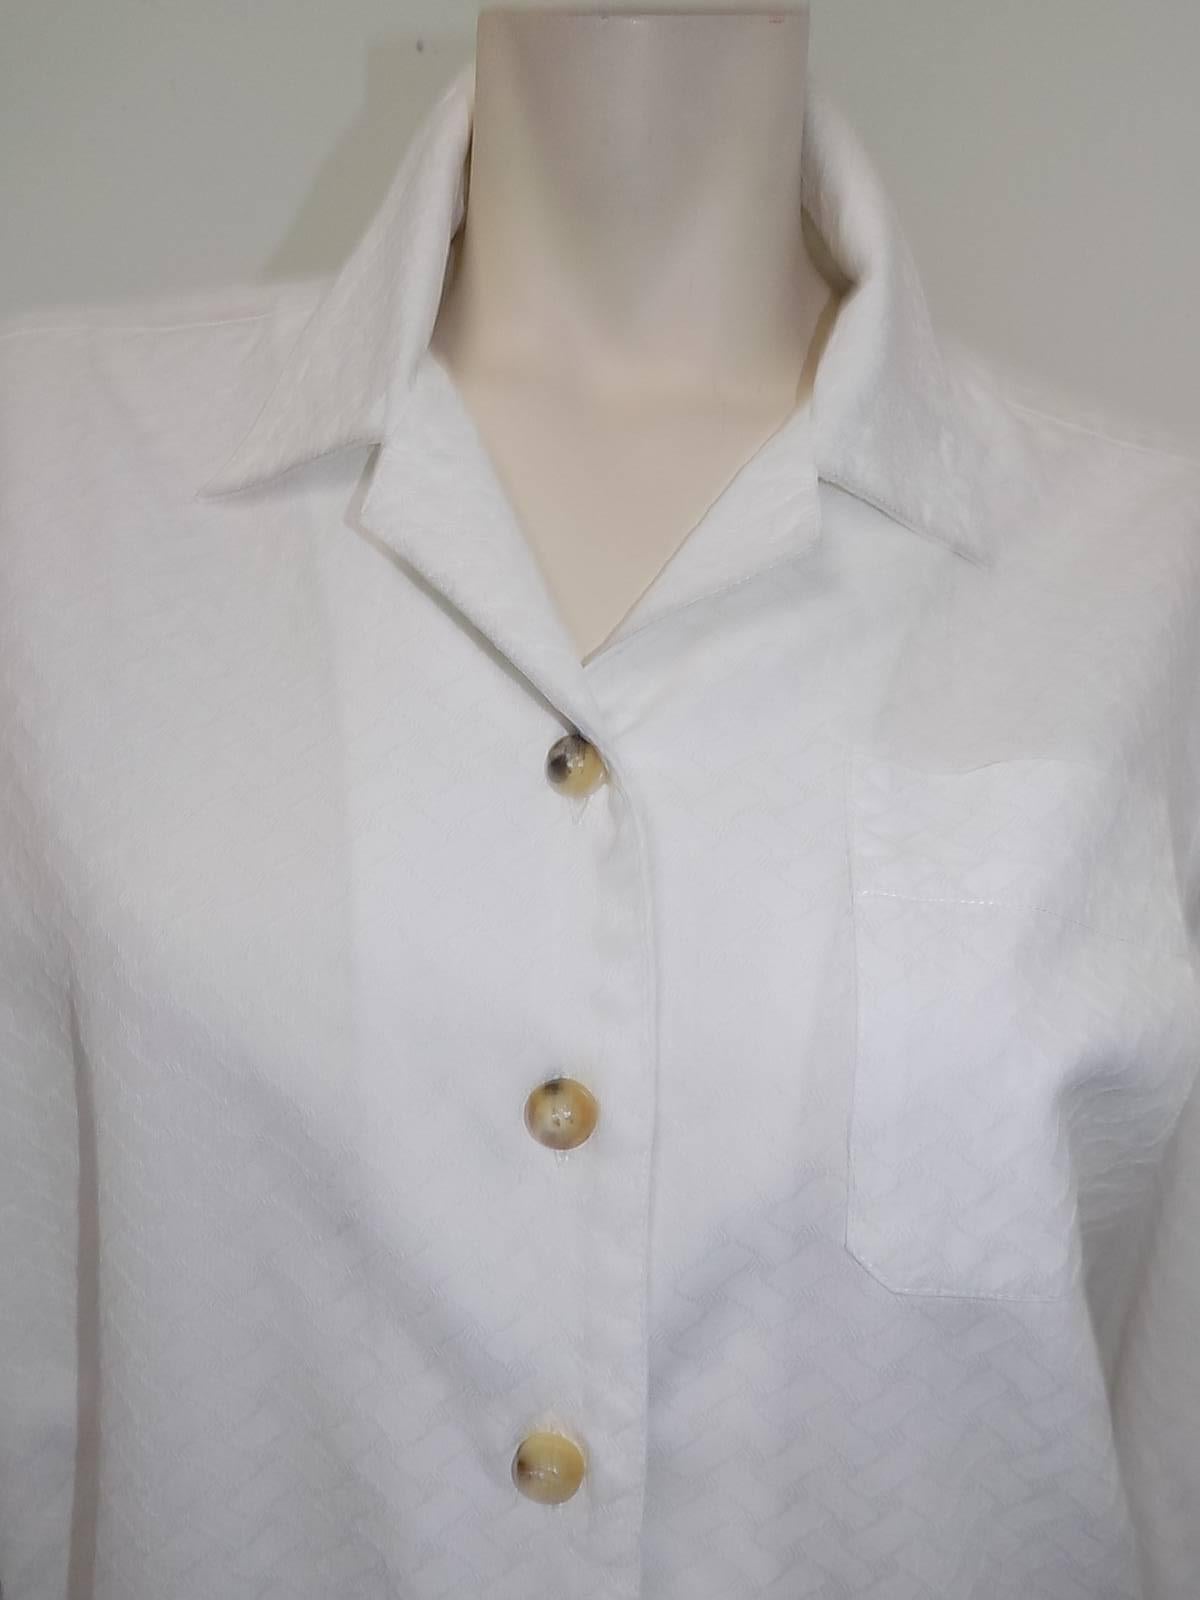  Perfect 100% cotton  crepe Hermes white  shirt . Crisp and fabulous featuring one top pocket, folded  cuffs, collar , back fold and beautiful horn buttons that are engraved " Hermes" Size 42 bust 46" length 27" sleeves 23" 